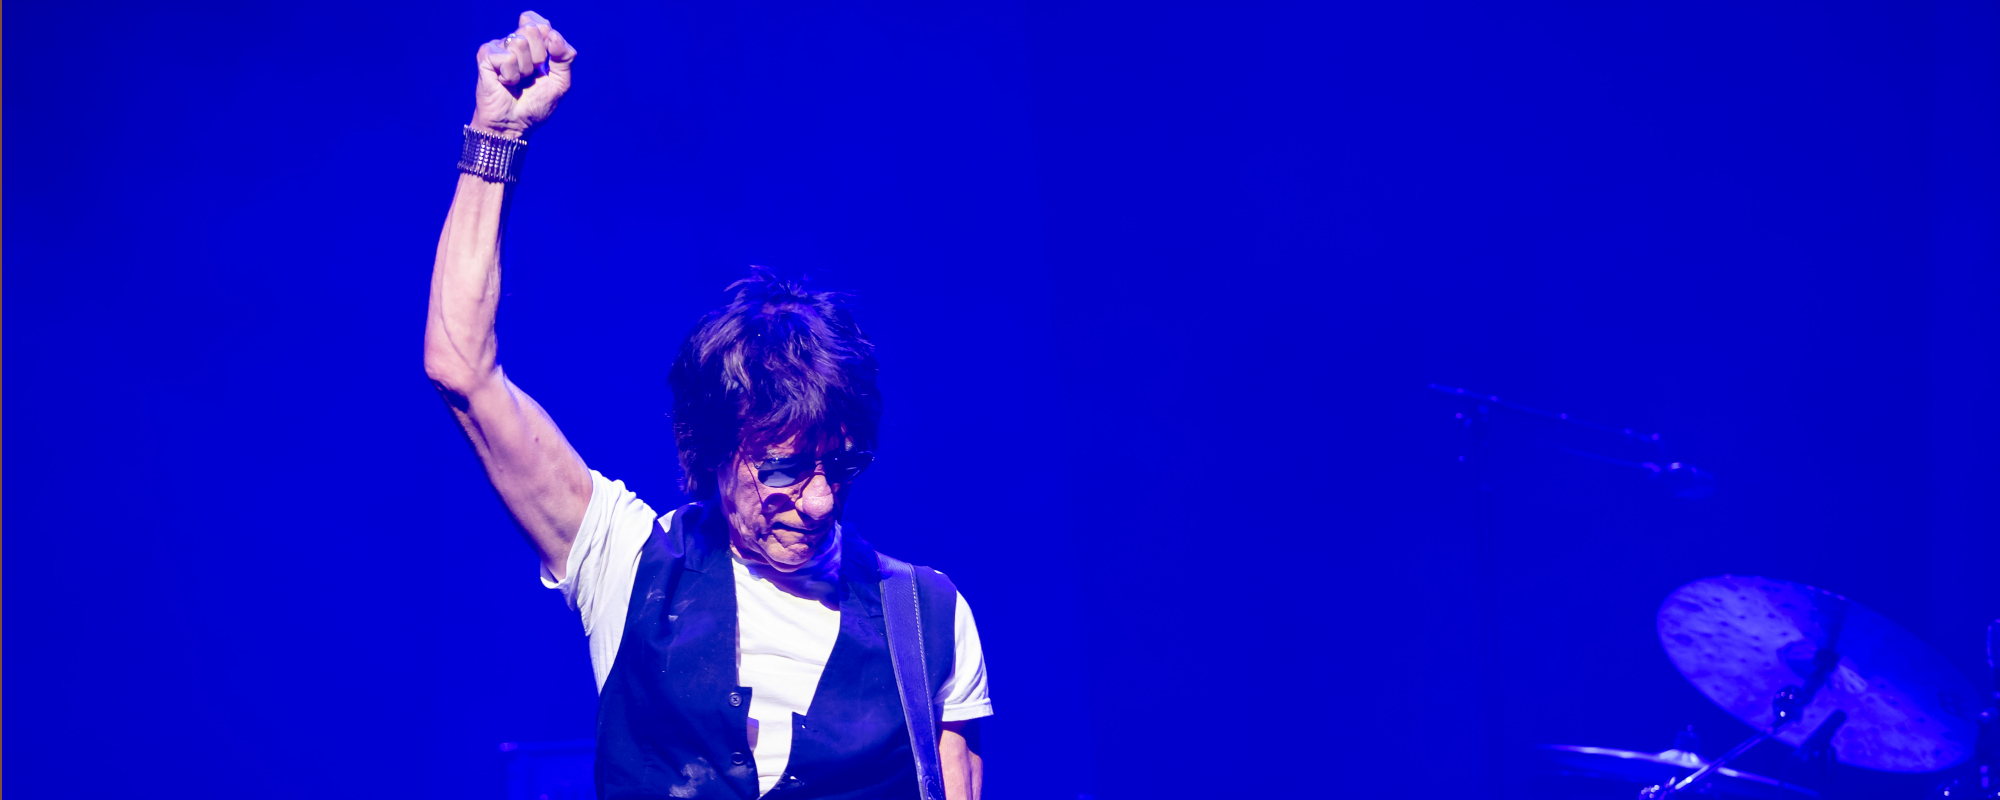 5 Electrifying Live Moments in Honor of the Late Jeff Beck